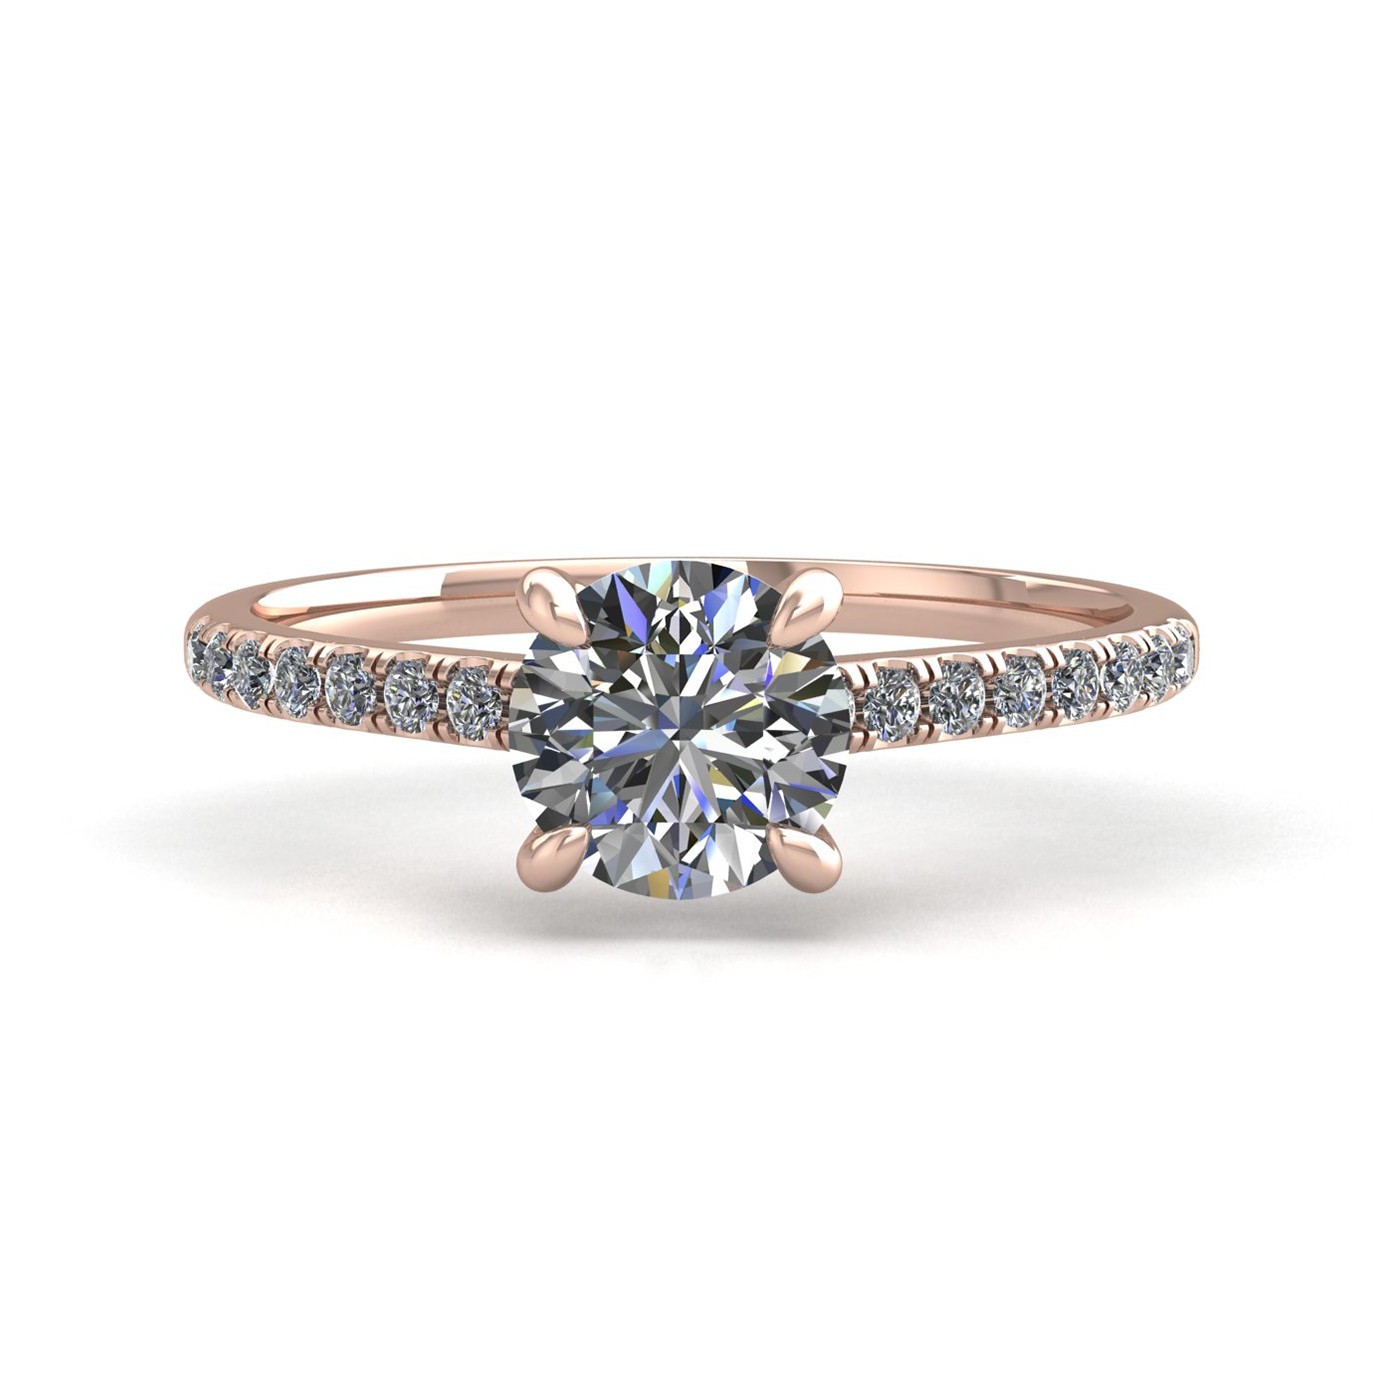 18k rose gold 2.0ct 4 prongs round cut diamond engagement ring with whisper thin pavÉ set band Photos & images